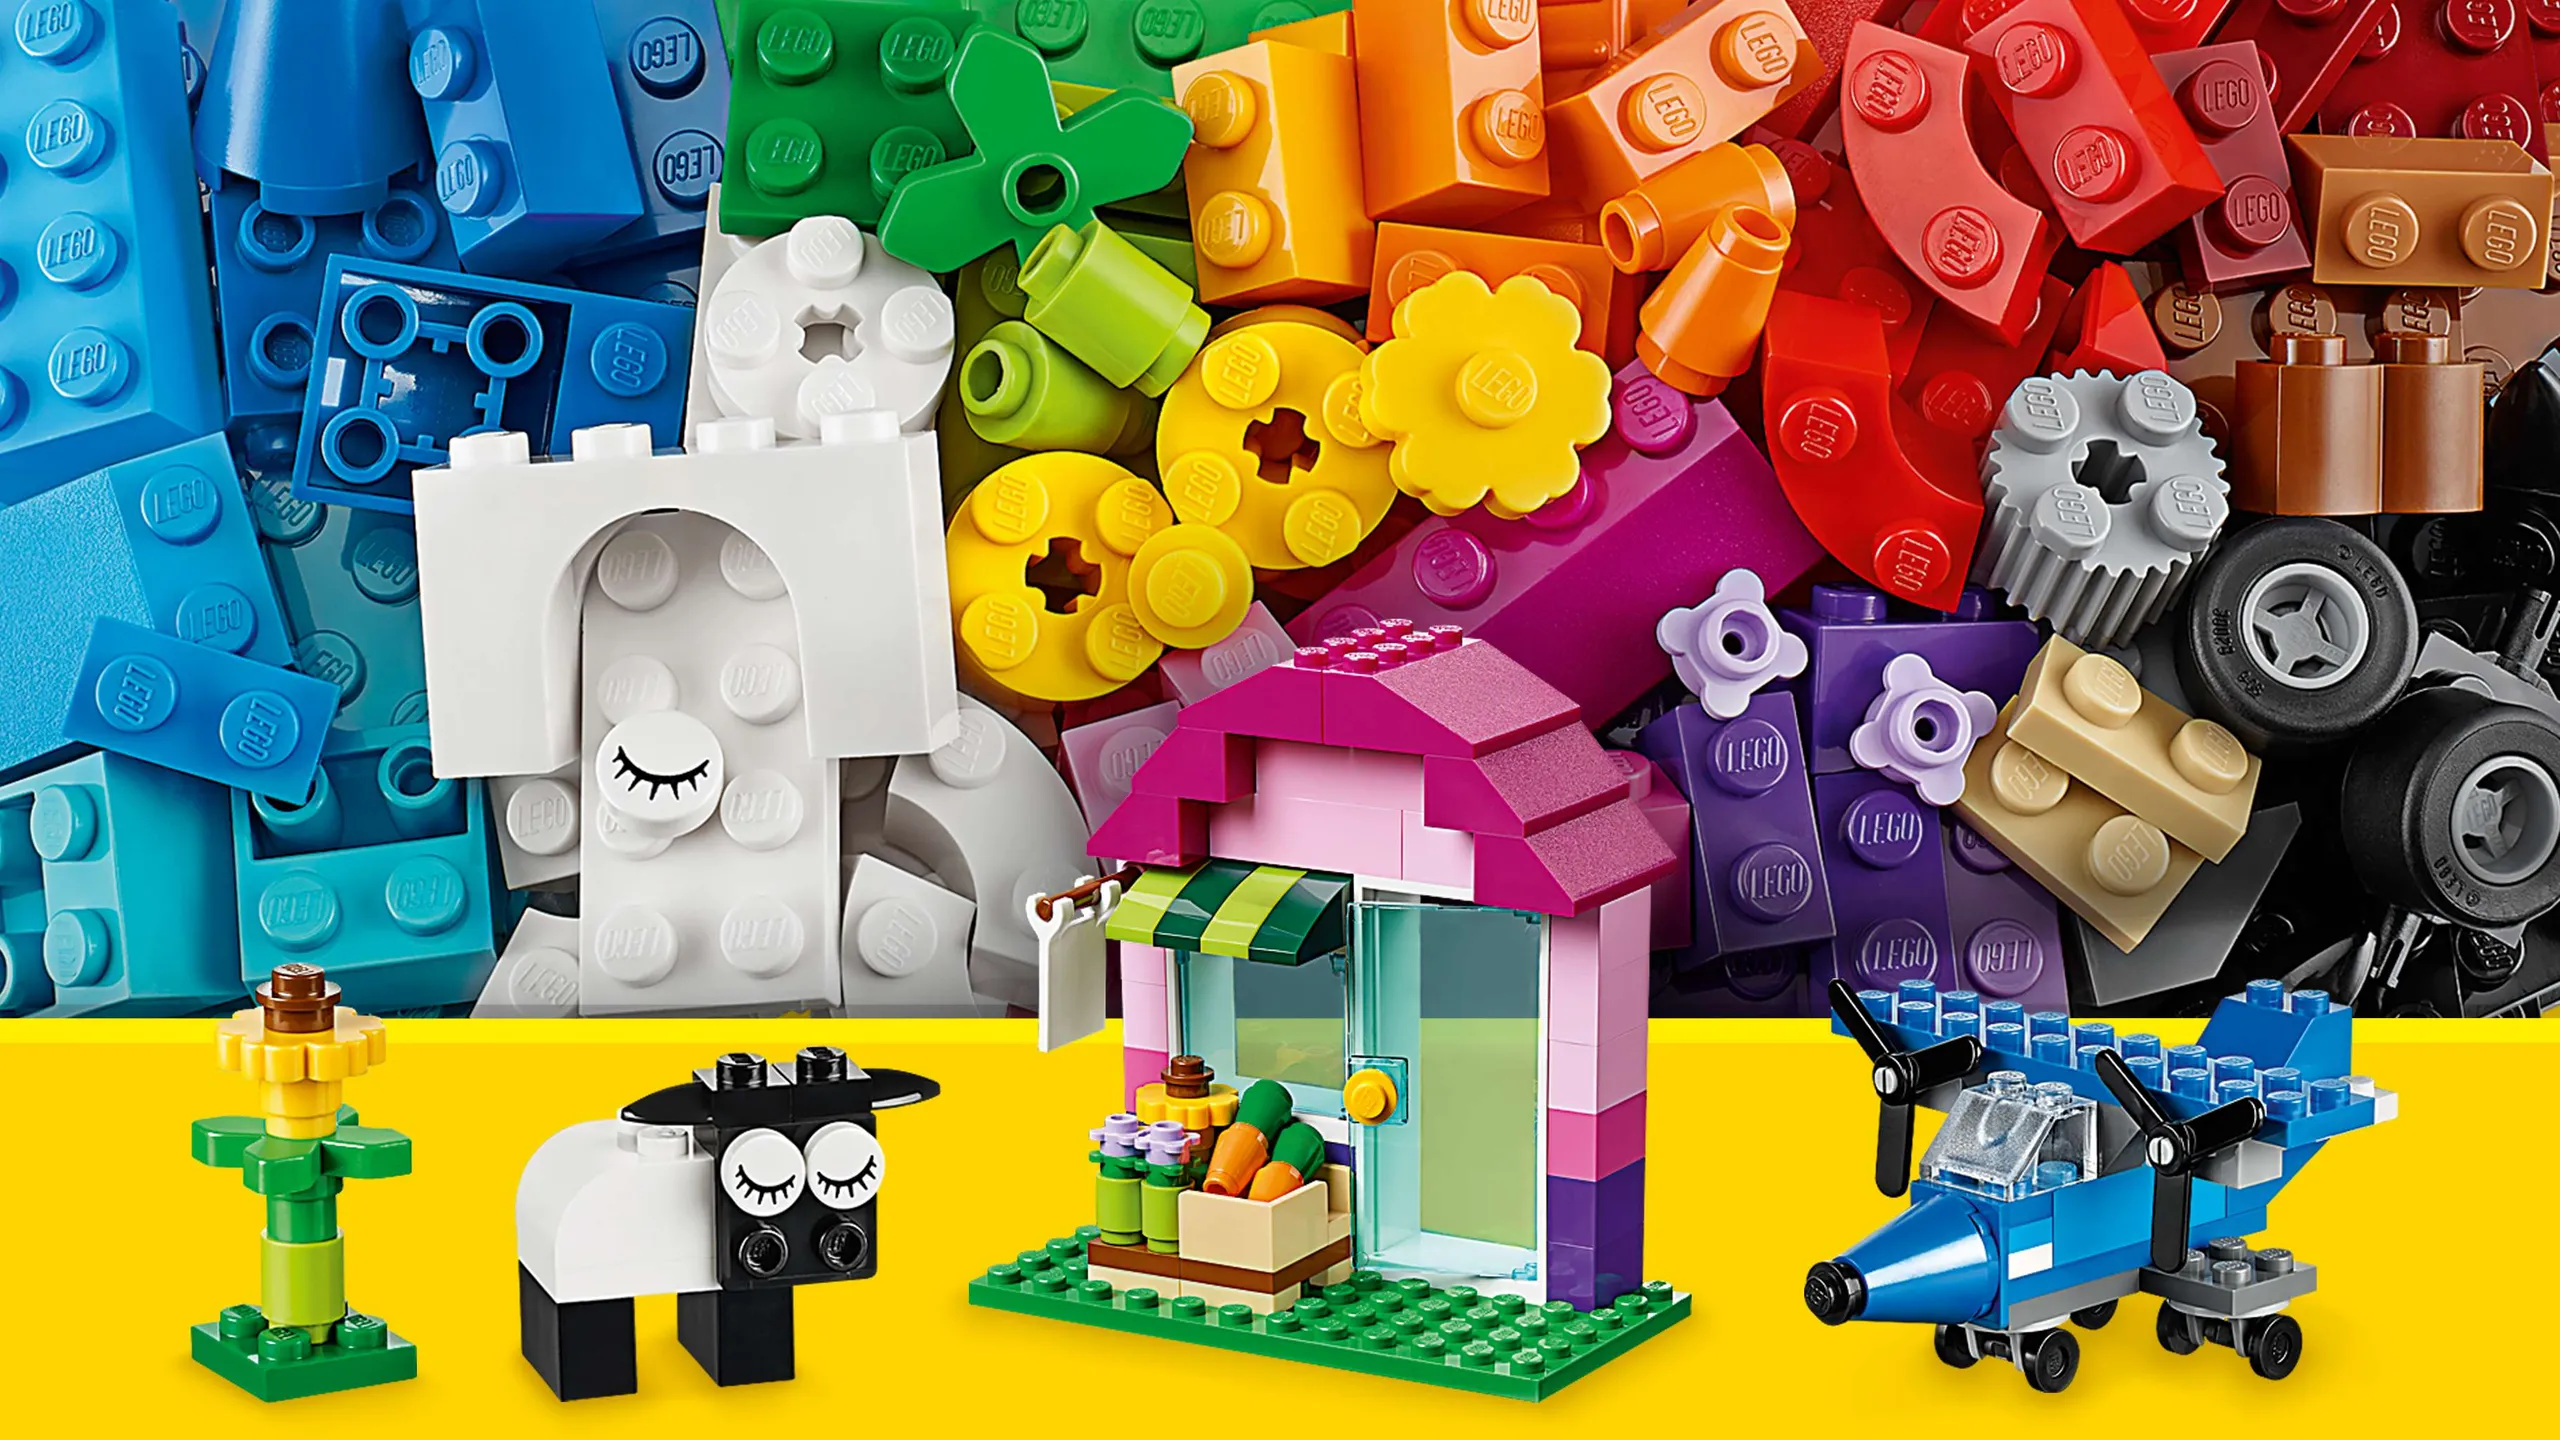 LEGO Classic Creative Bricks - 10692 - Use blue, green, pink, white and black bricks to build a sunflower, a house, a sheep or a plane with propellers.